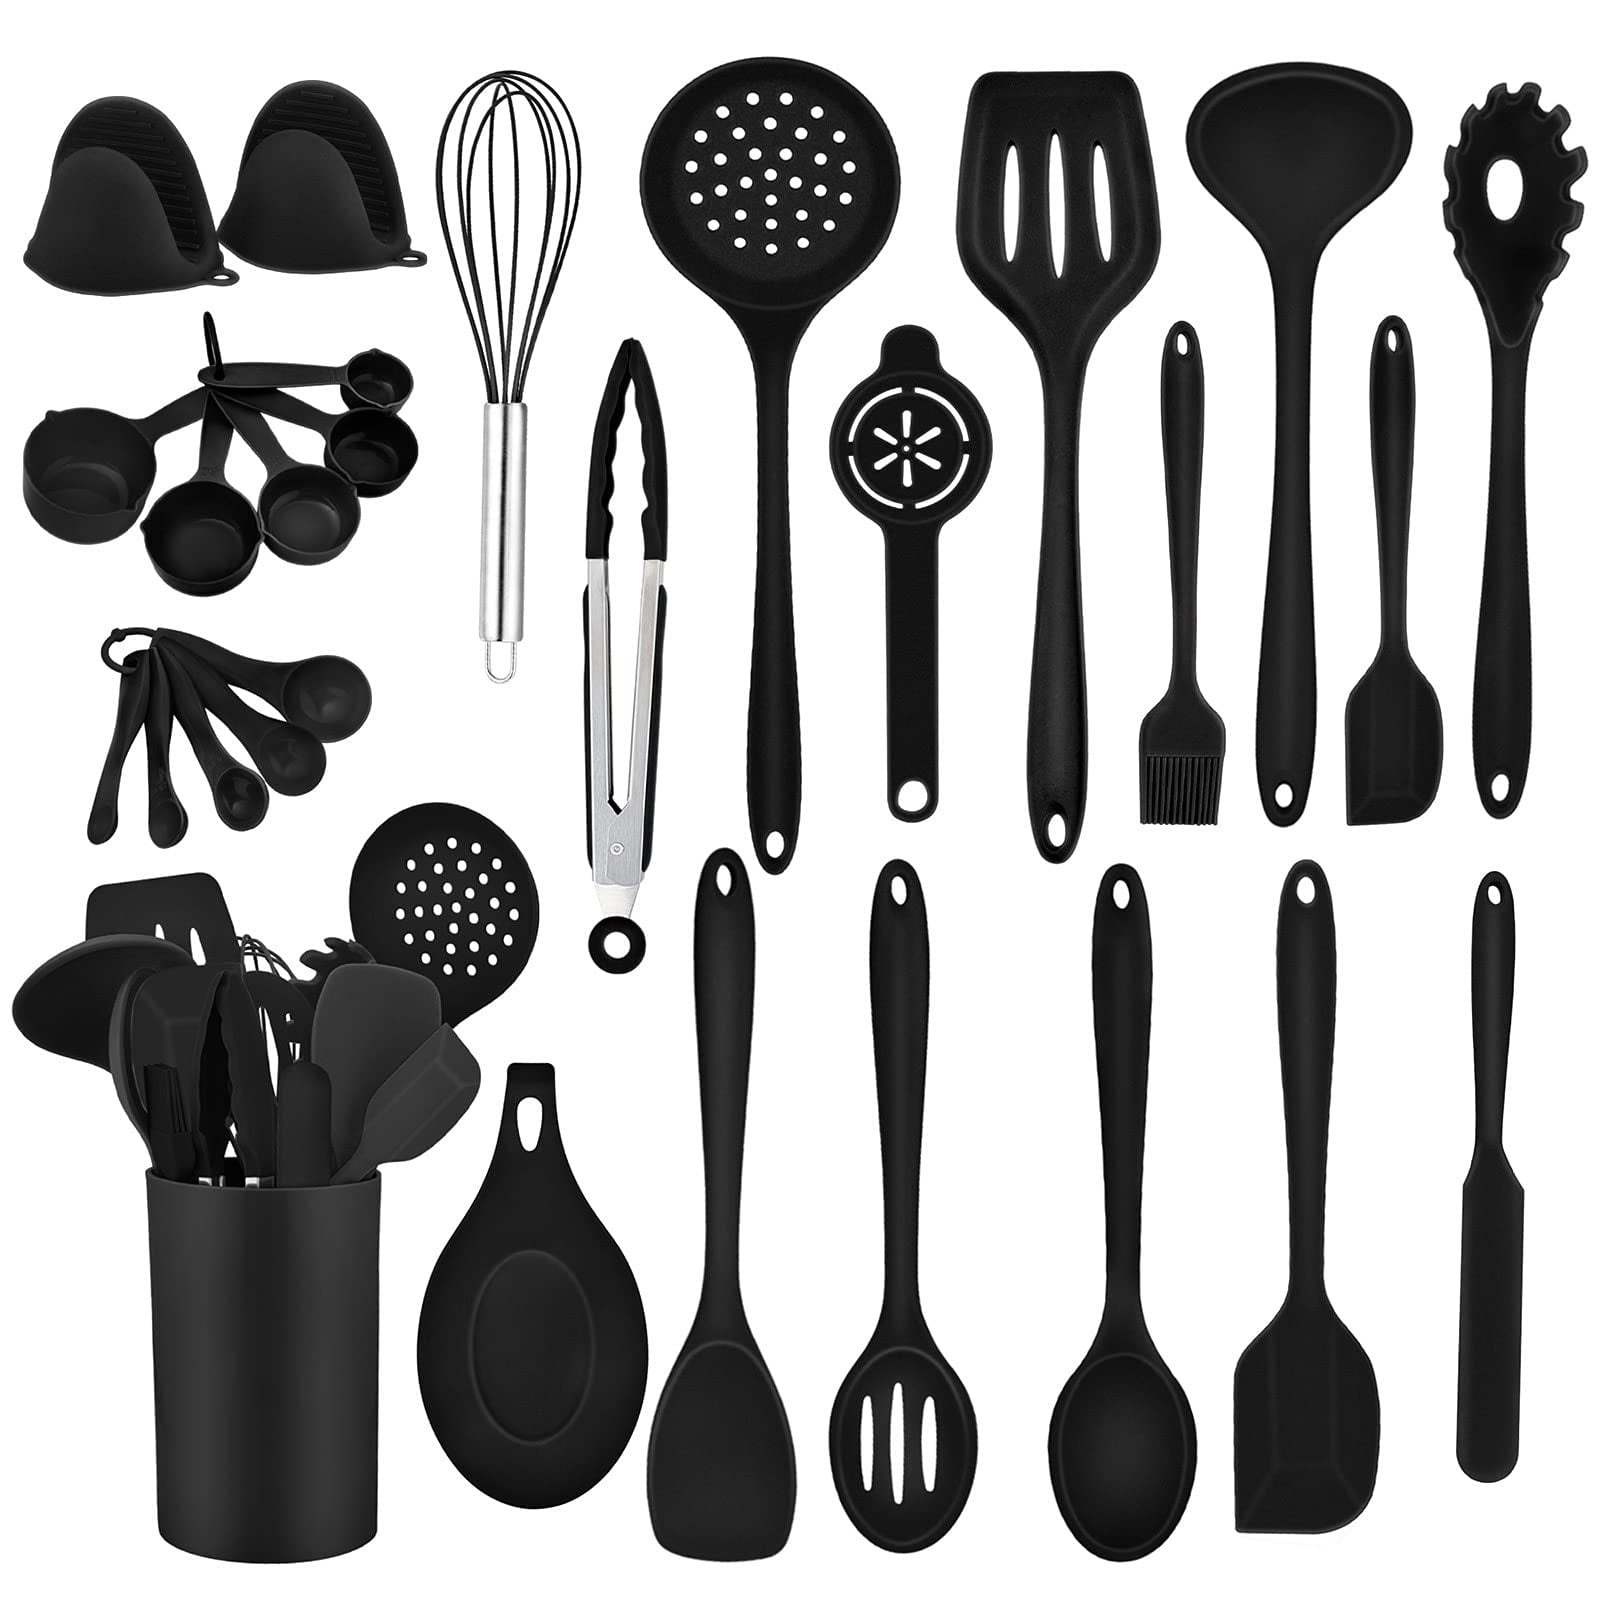 Cuisinart Elements Silicone Black Utensils Set of 8 – Monsecta Depot